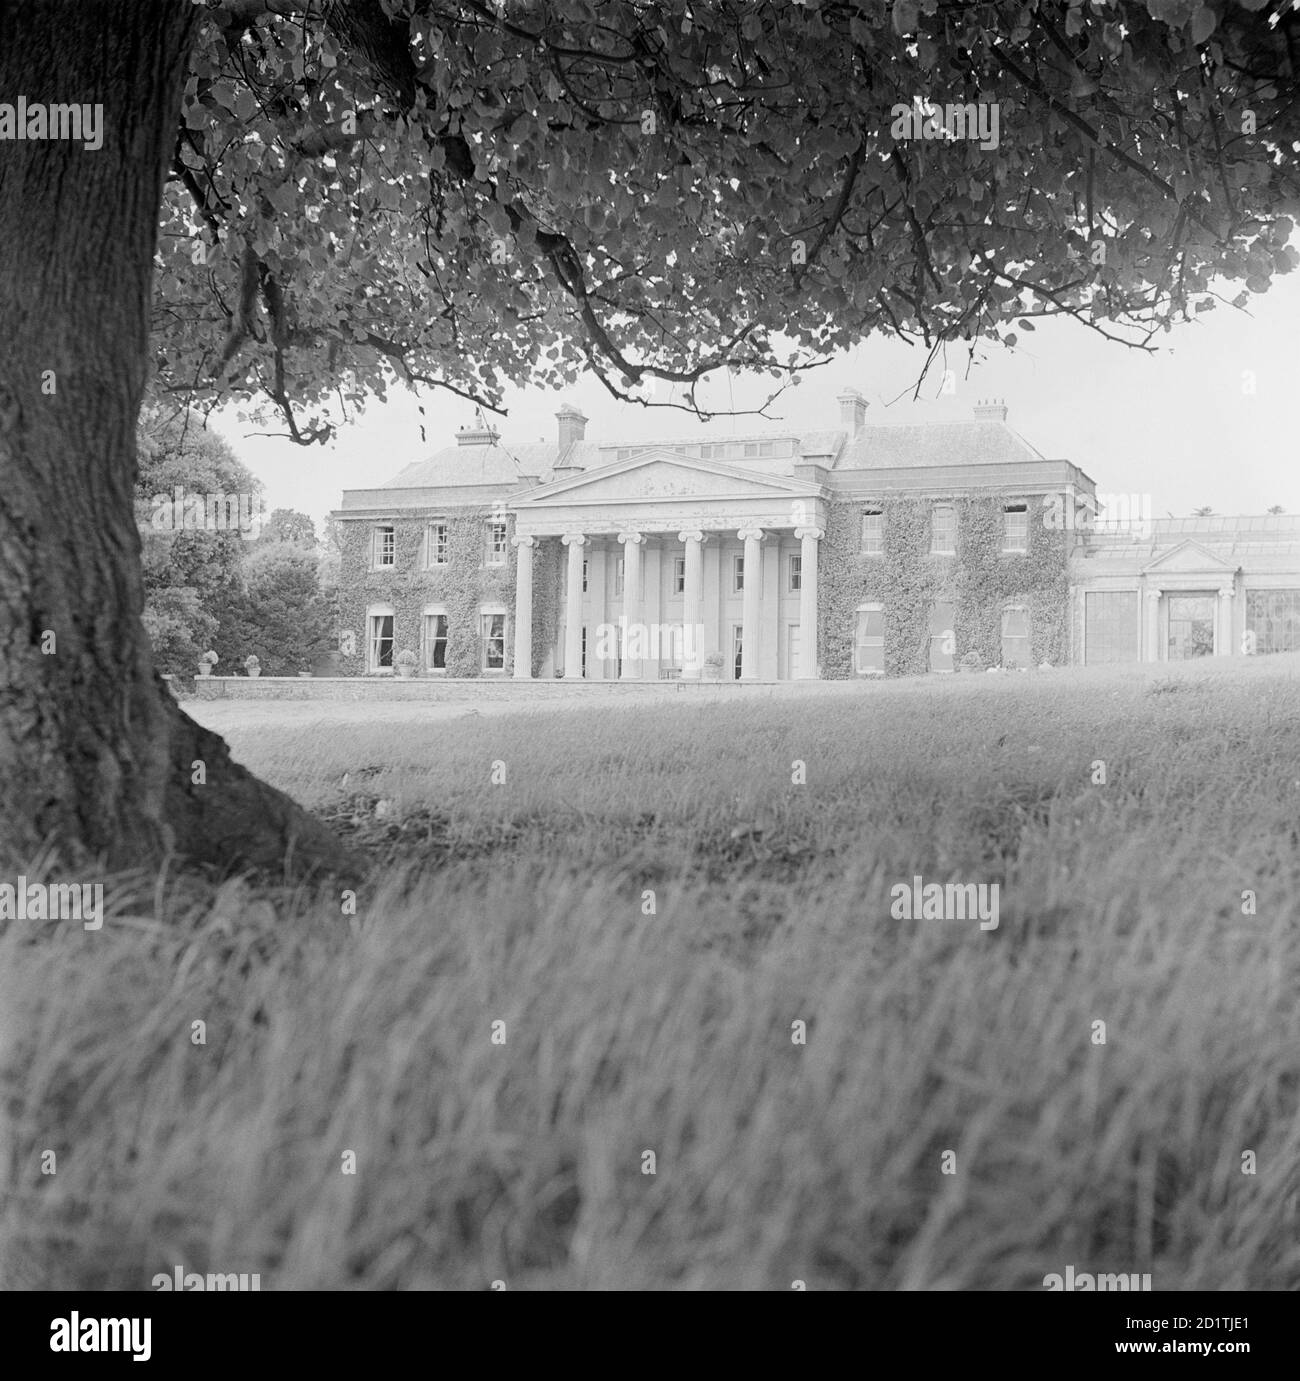 TRELISSICK, Feock, Cornwall. The entrance front of Trelissick, Feock, with its pedimented portico. It was built by P F Robinson circa 1825. Pevsner called it 'the severest neo-Greek mansion in Cornwall'. Photographed by Eric de Mare between 1945 and 1980. Stock Photo